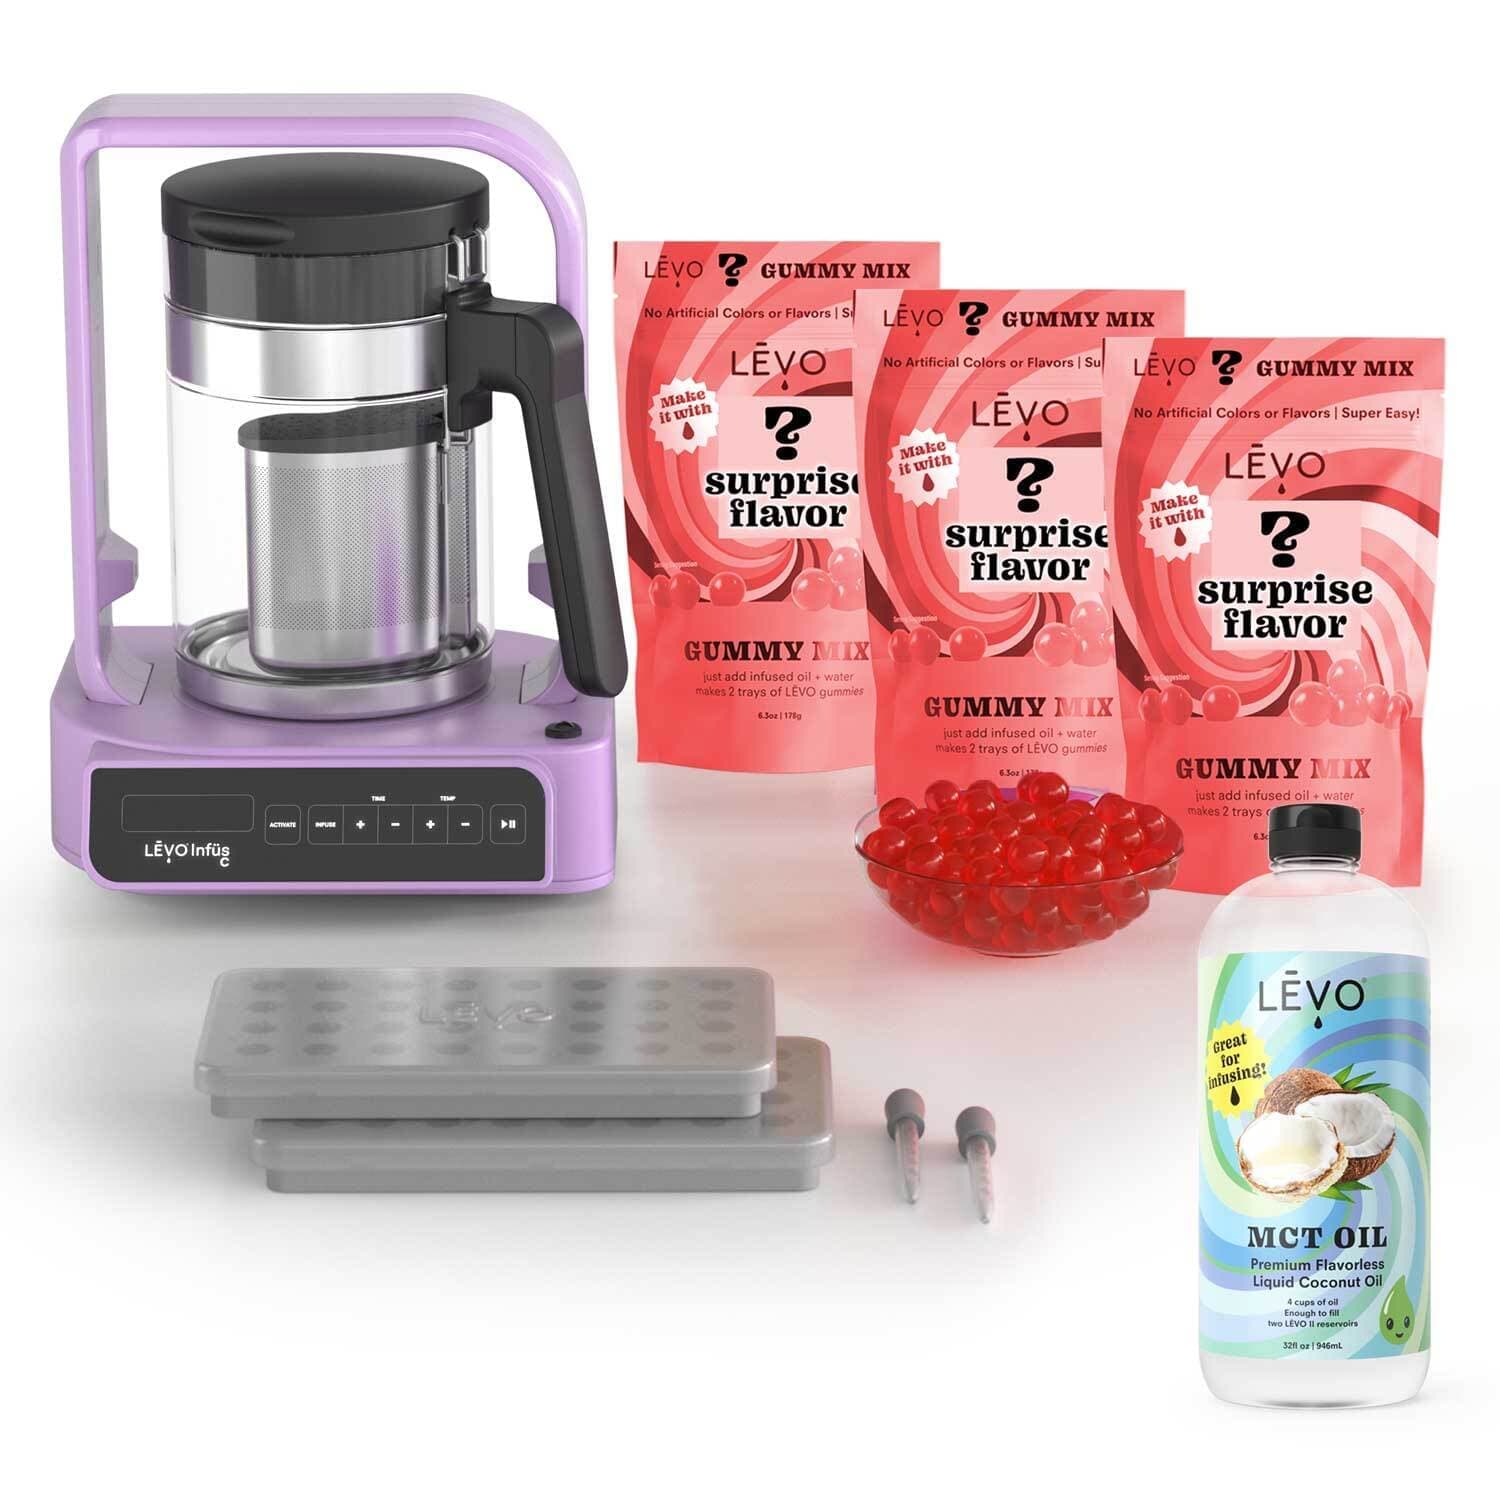 LEVO gummy making bundle with 3 gummy mix packs, MCT oil, and LEVO C machine. Make professional-grade gummies with LĒVO C Gummy Edibles Kit in Lavender.